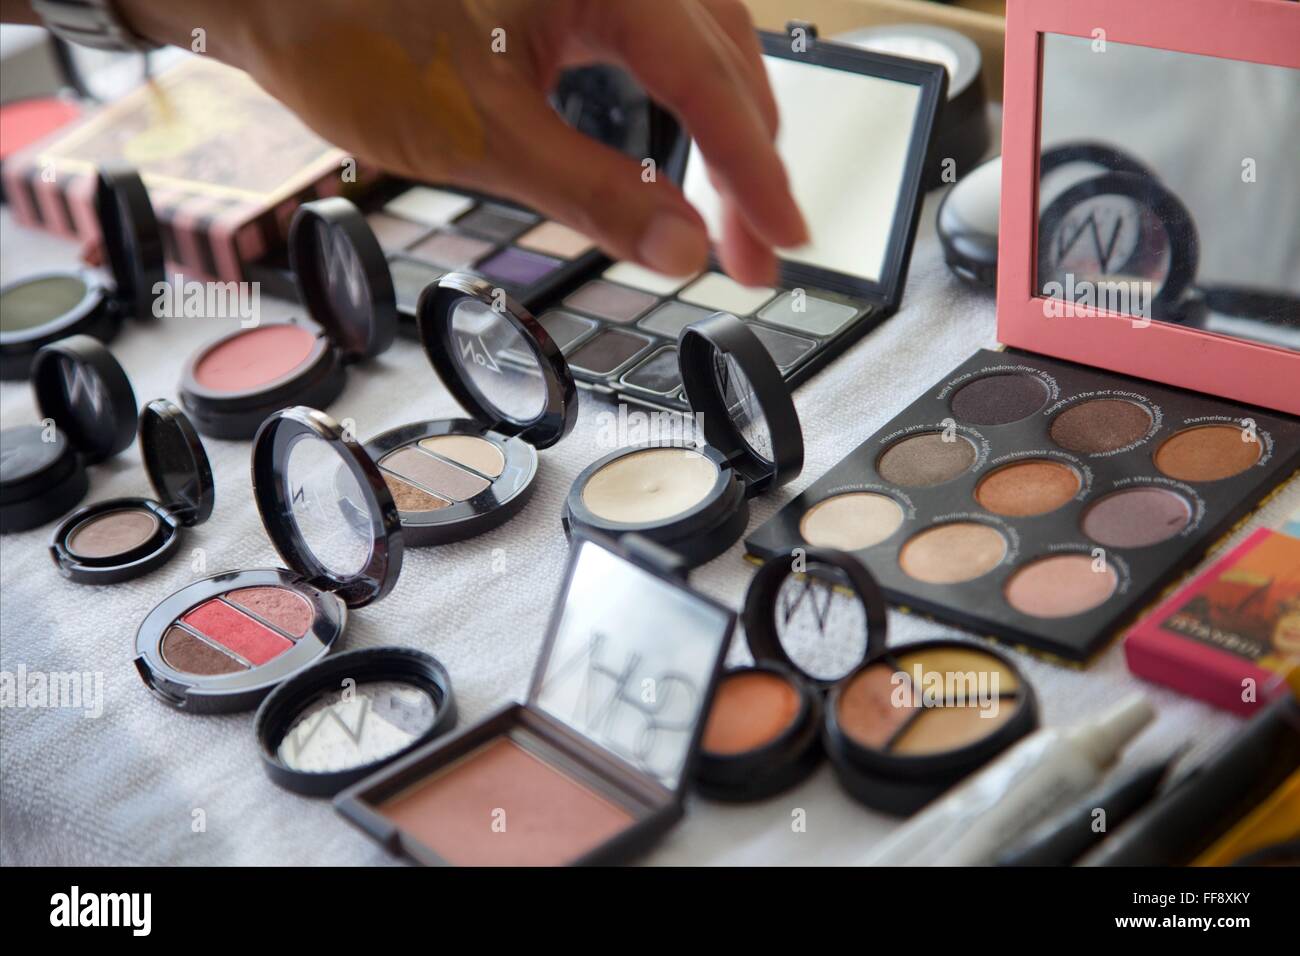 A close up of a make up table Stock Photo